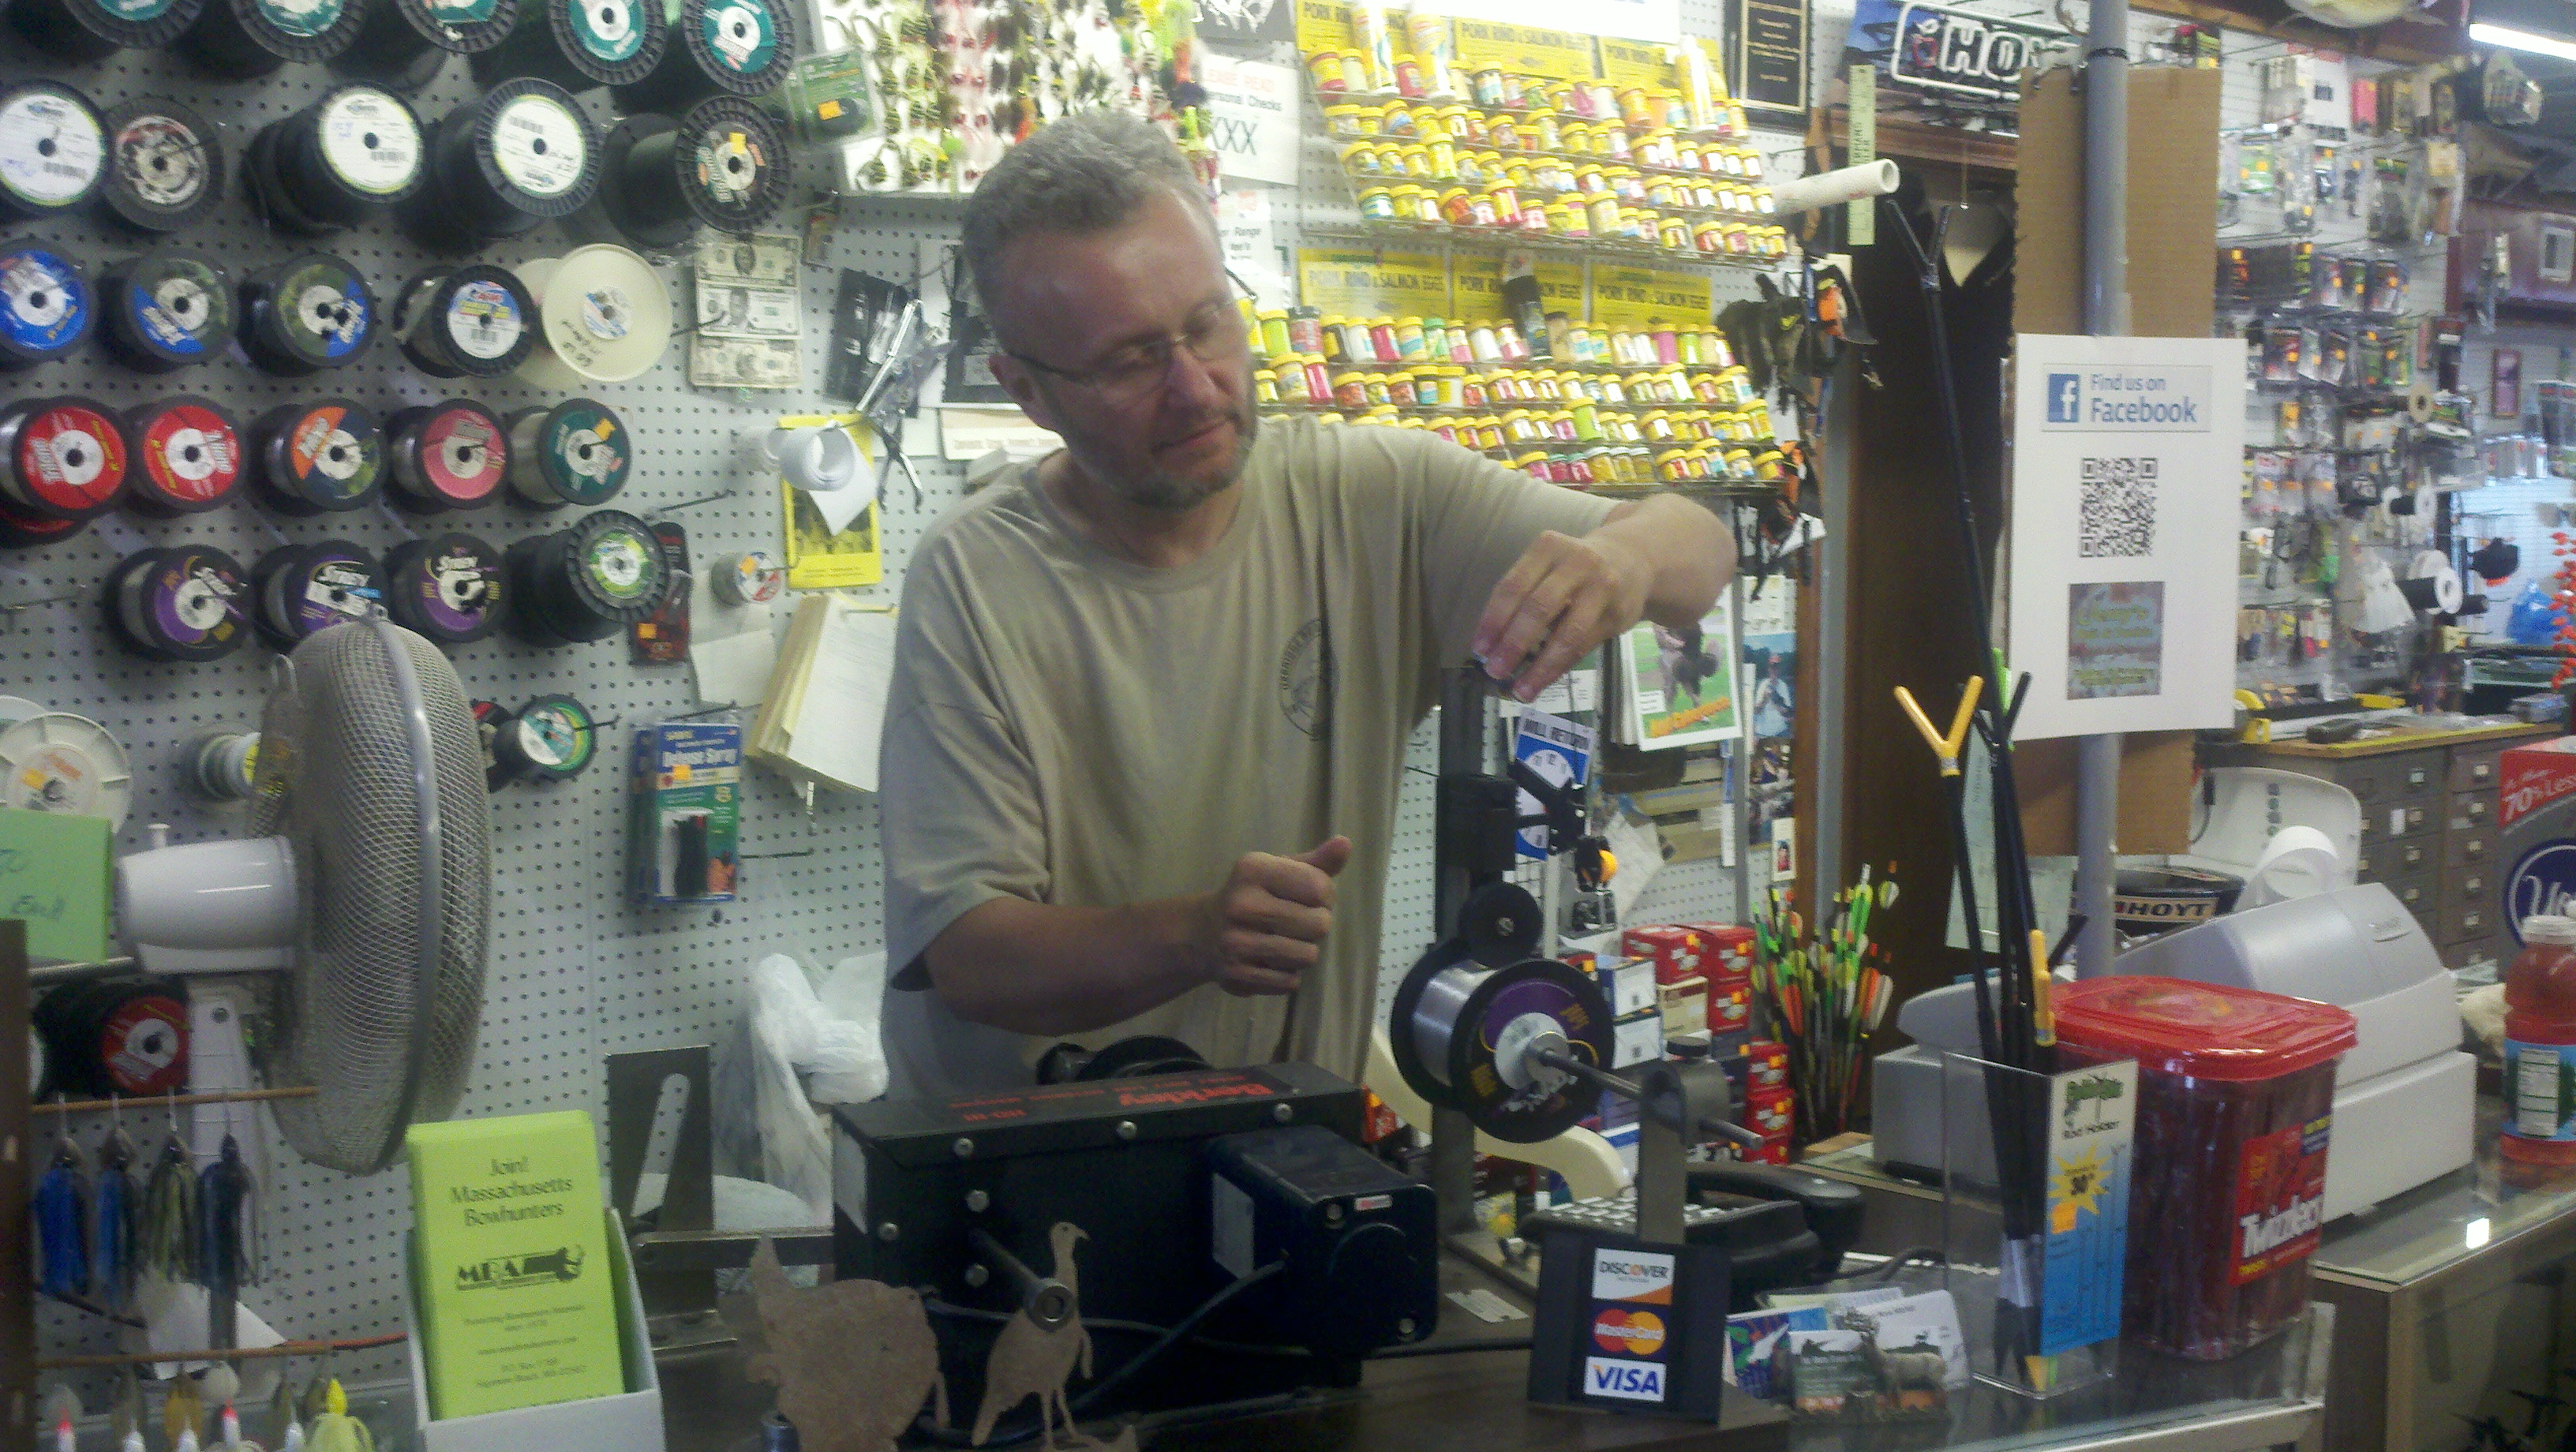 Fishing, Jerry's Bait & Tackle, Fishing, Archery, Indoor RangeJerry's  Bait & Tackle, Fishing, Archery